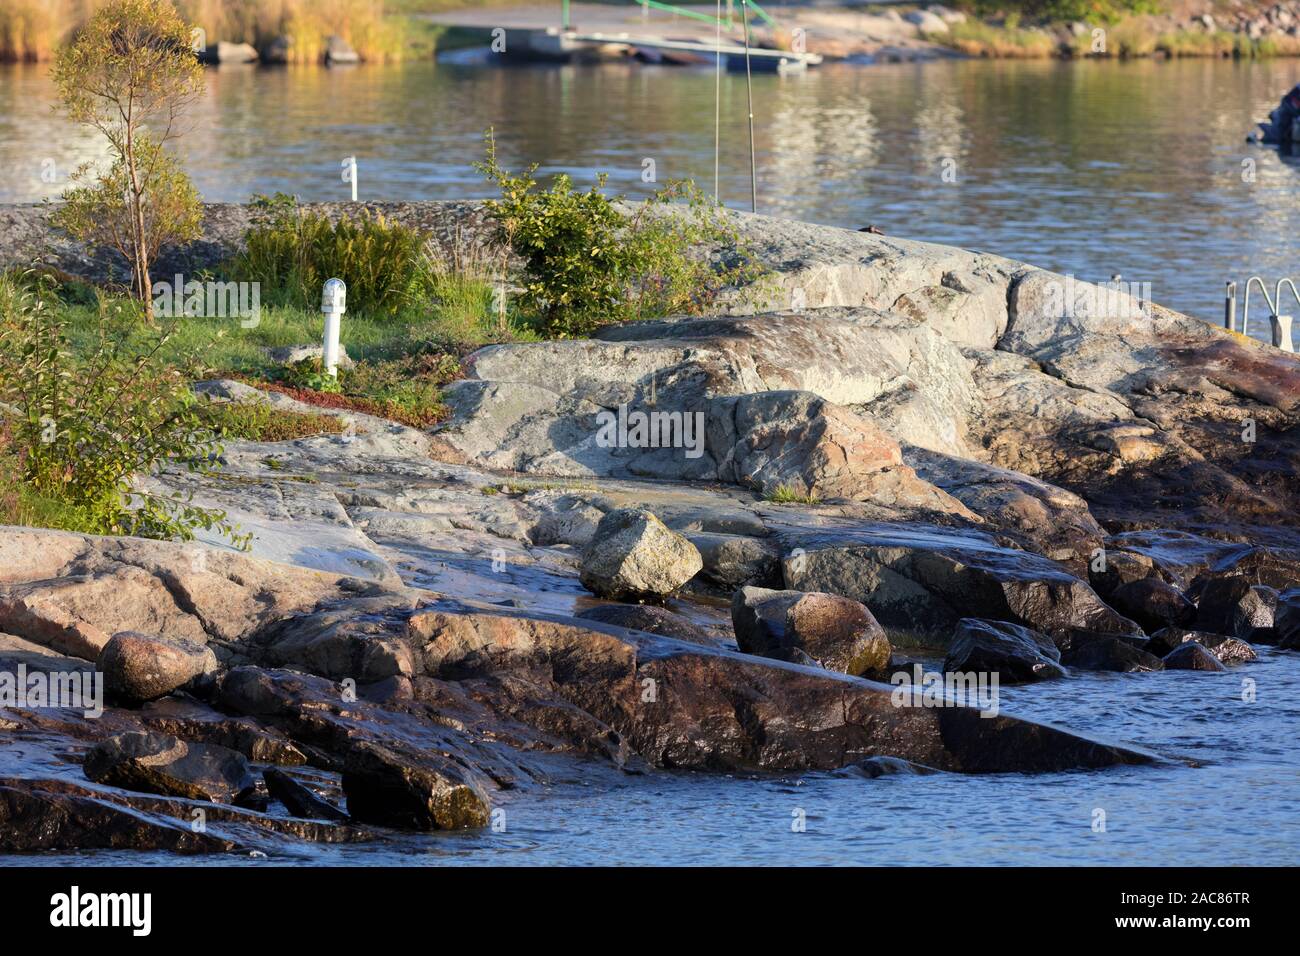 Page 2 - Lidingö High Resolution Stock Photography and Images - Alamy